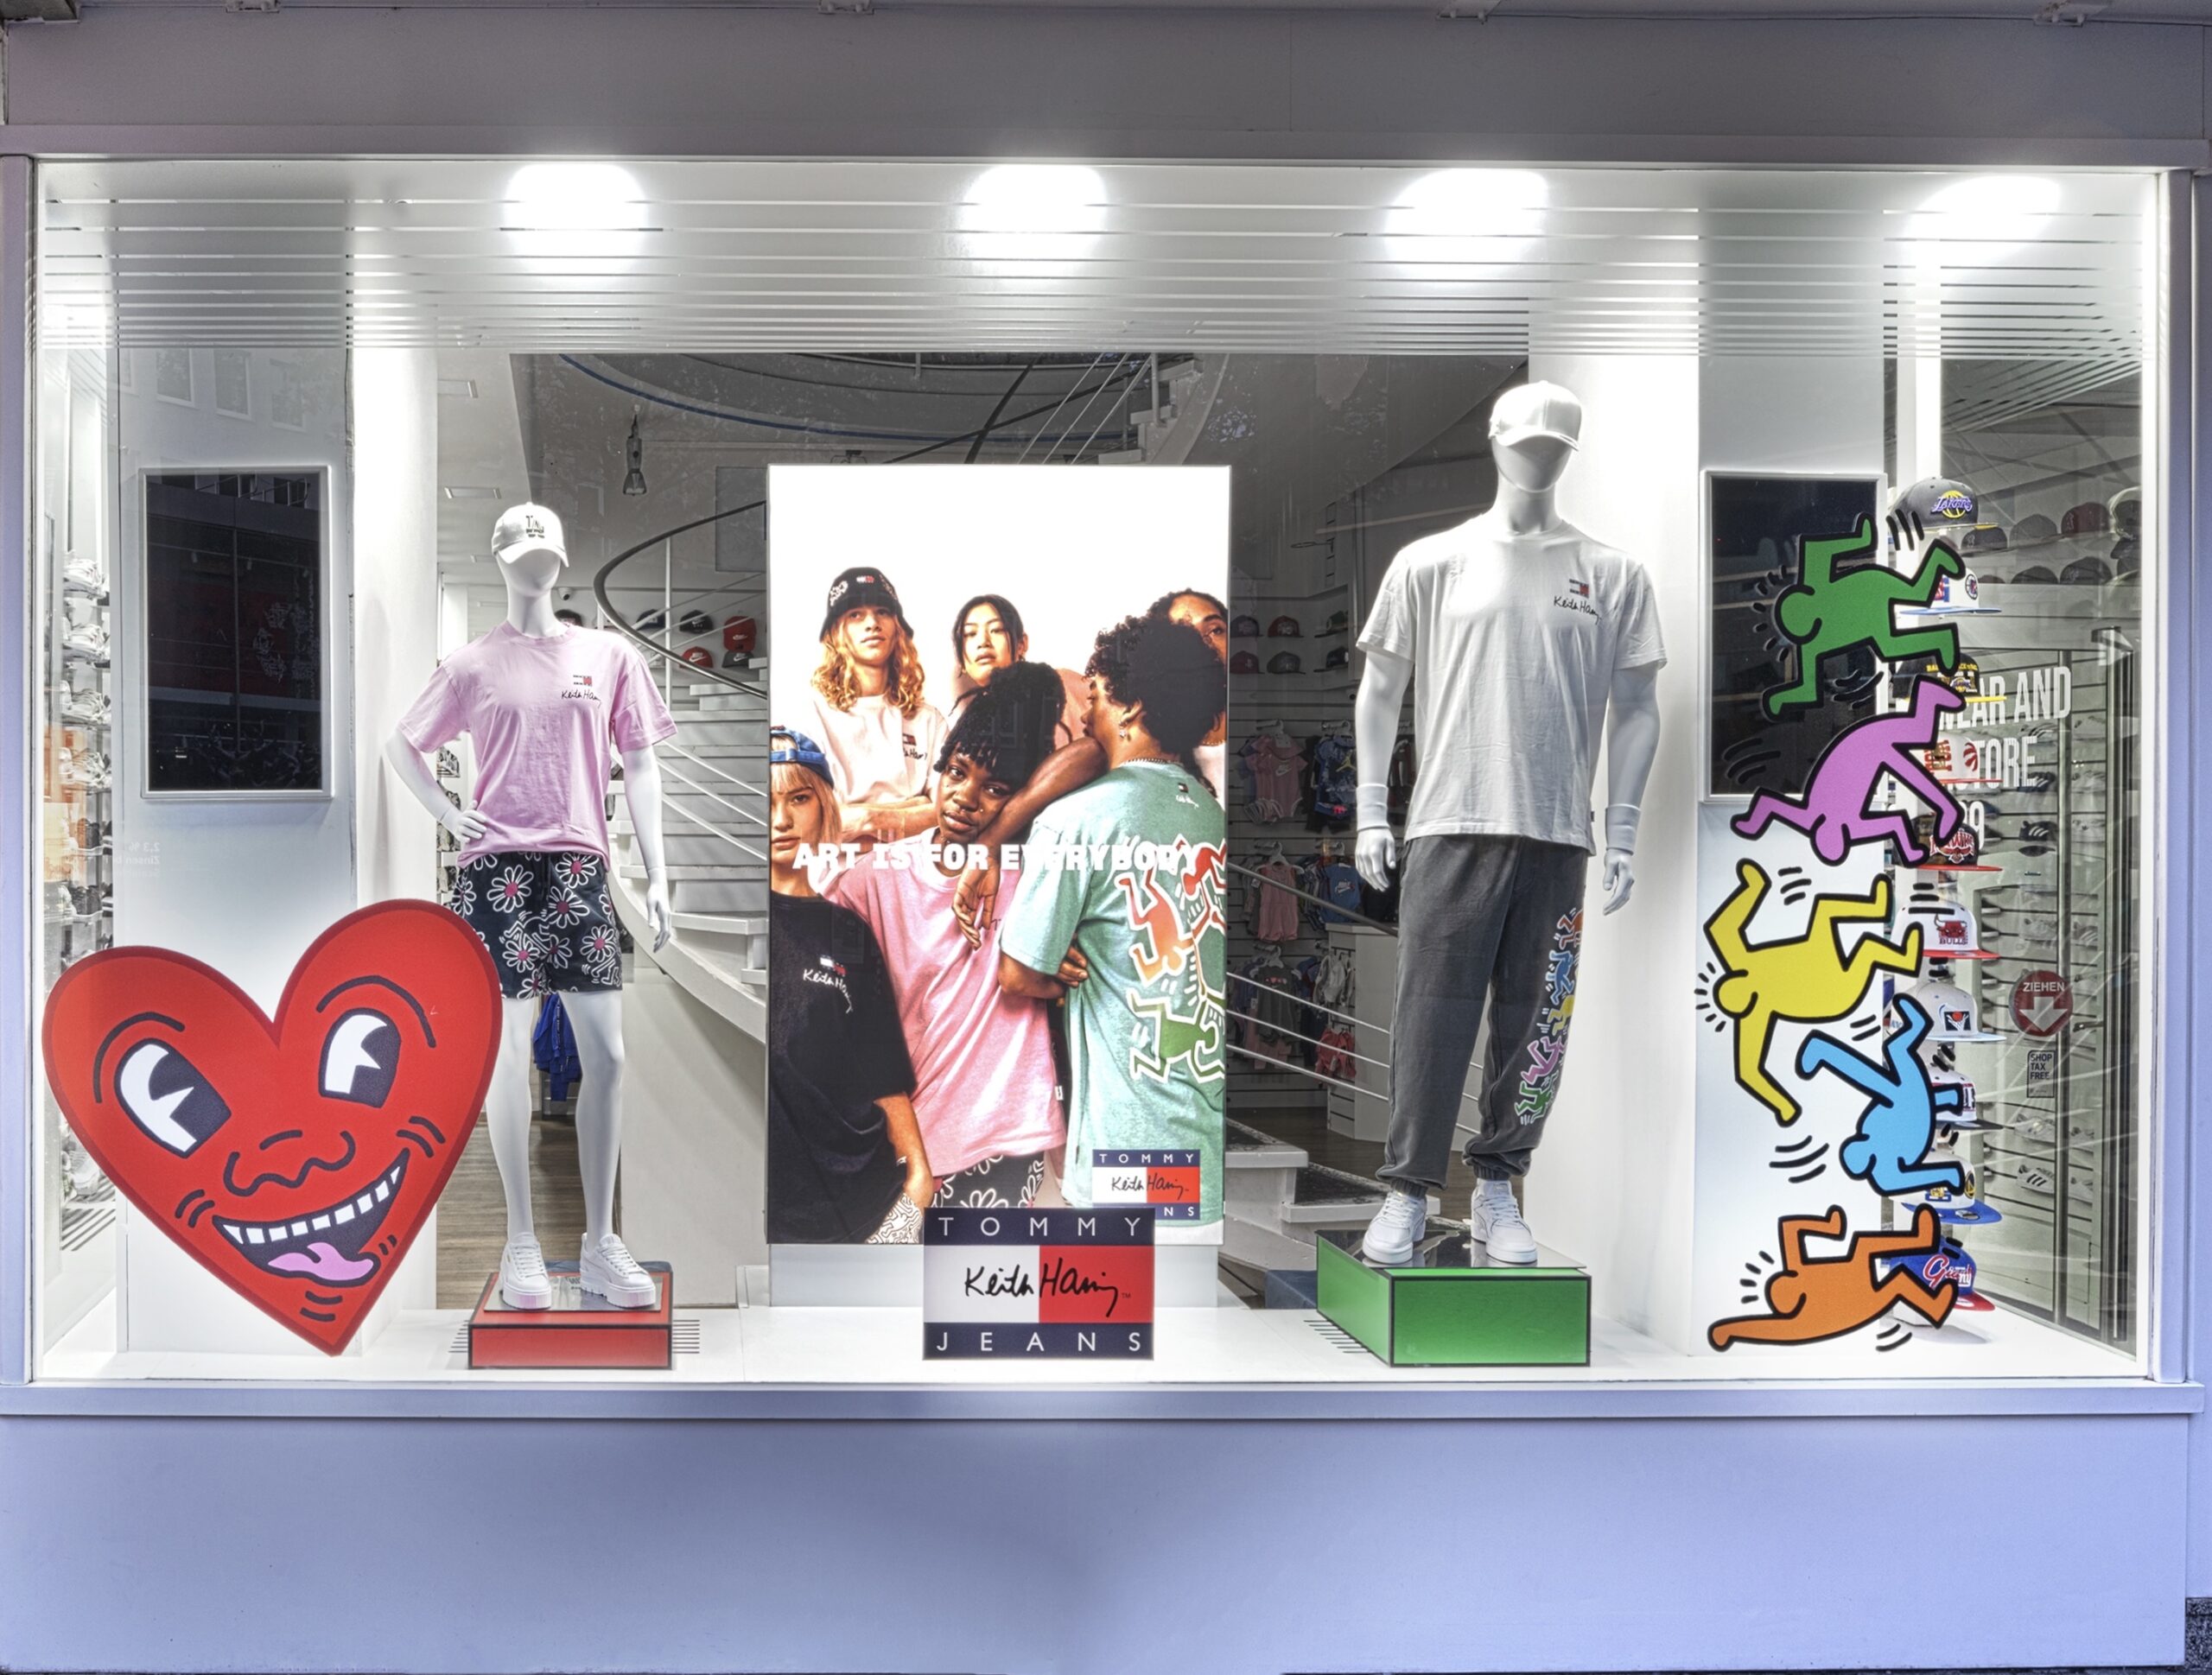 DFROST, Tommy Hilfiger, Window Campaign, Tommy Hilfiger x Keith Haring, Window Campaign, POS Campaign, Window Rollout, Retail Marketing Campaign